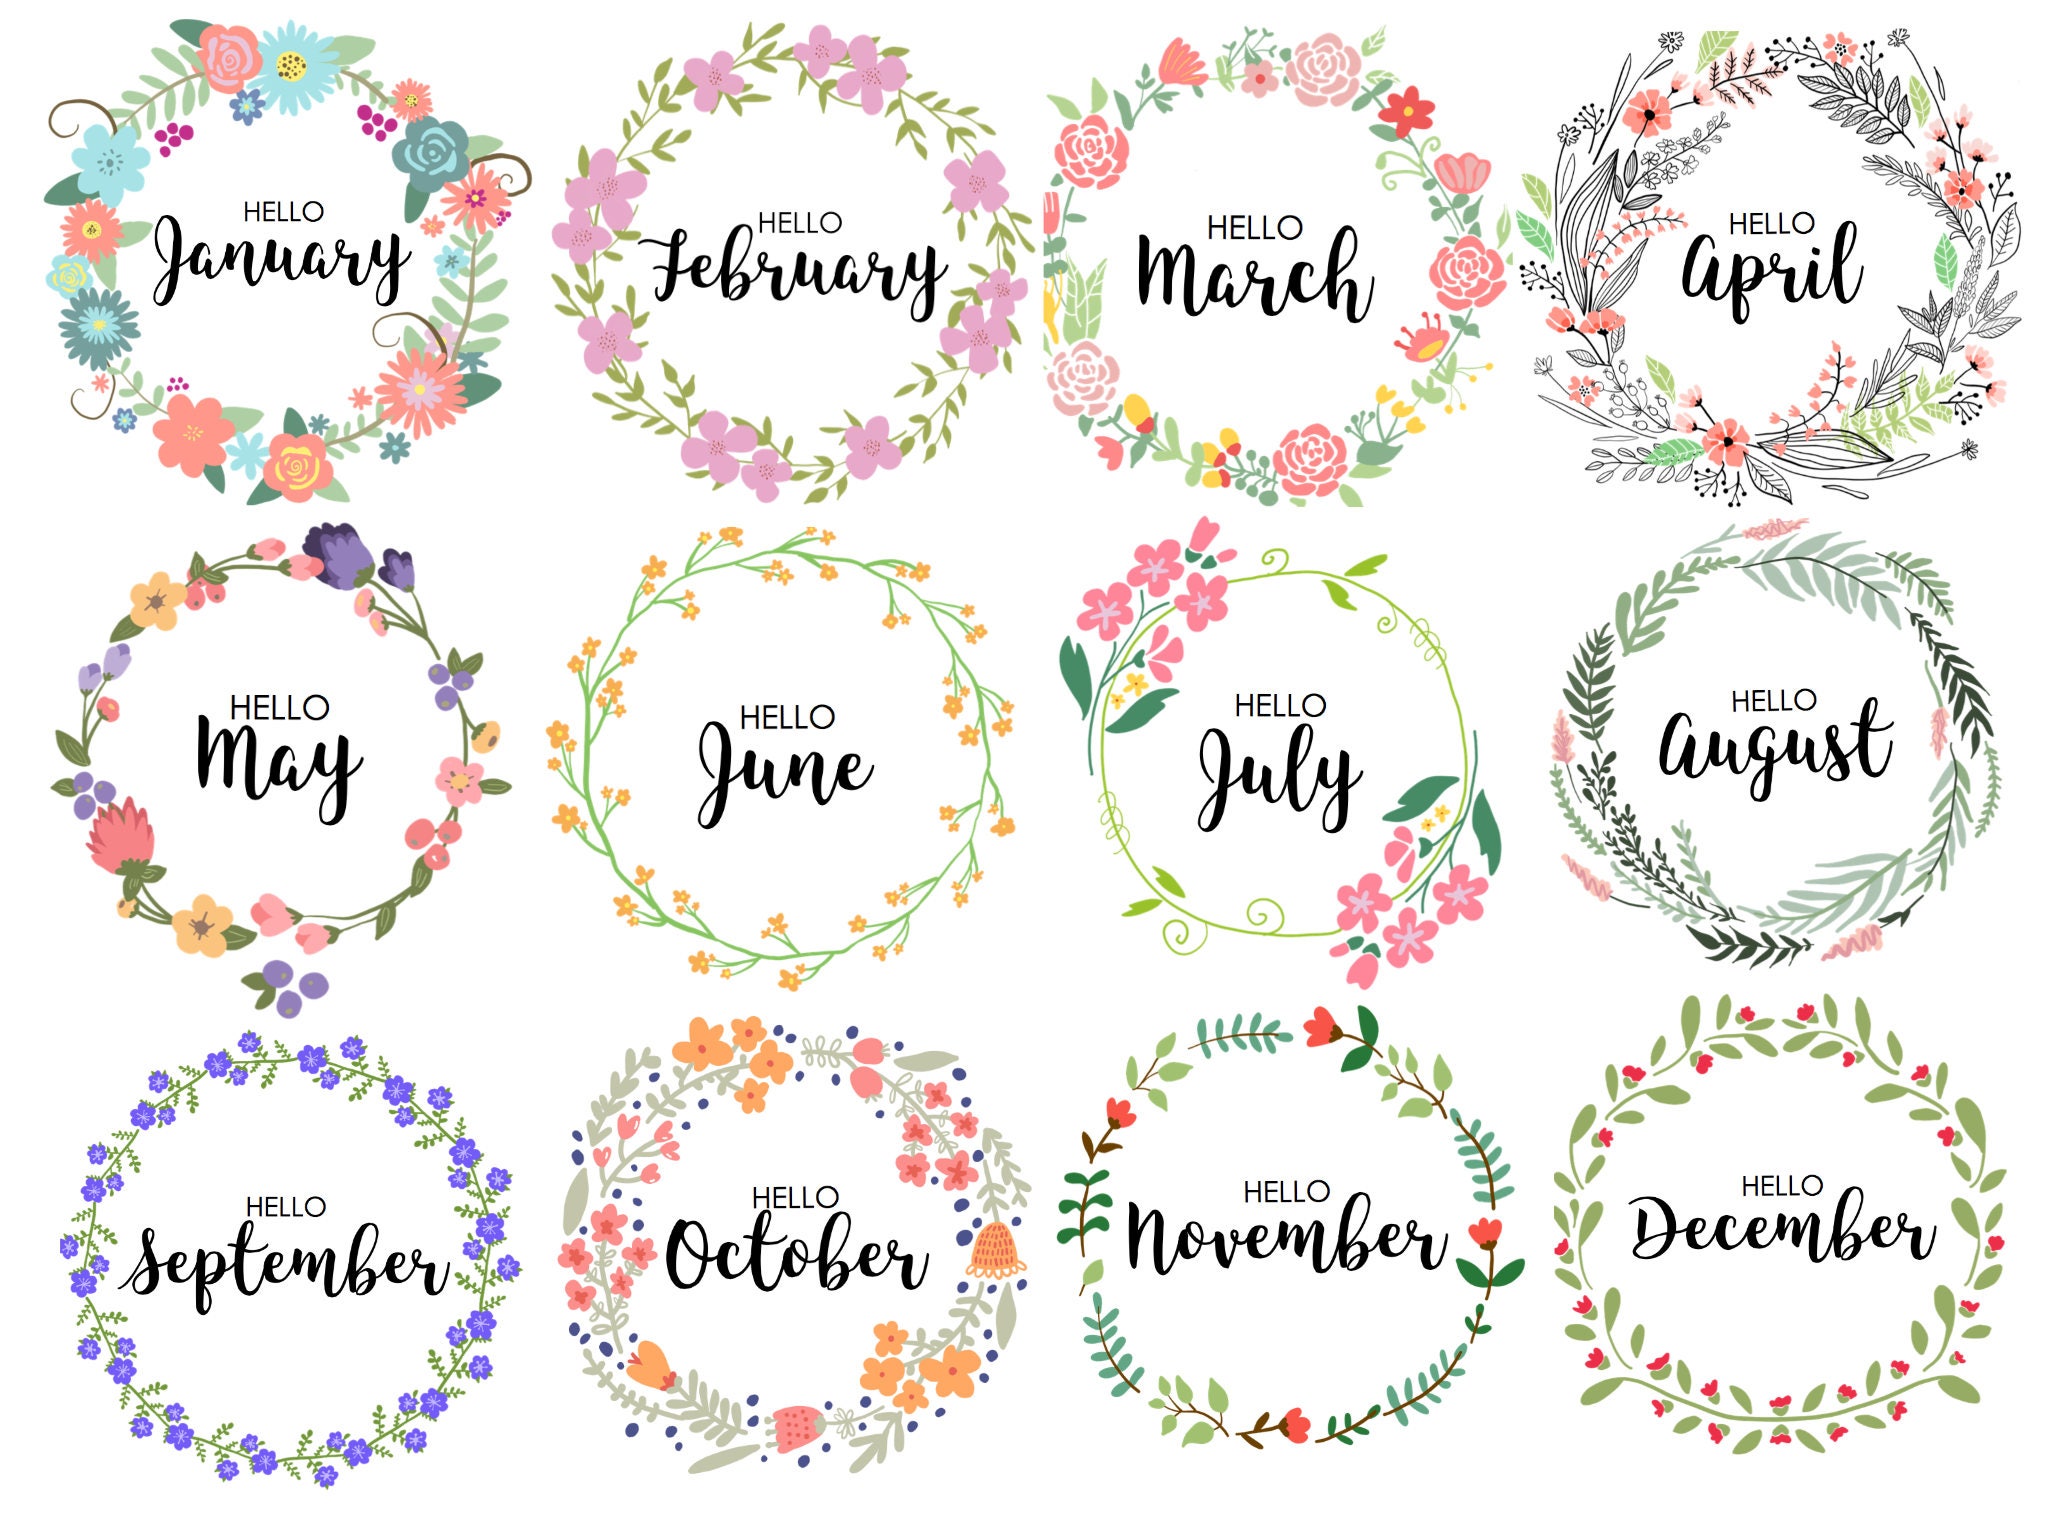 JOURNAL MONTHLY COVERS wreath monthly bullet journal